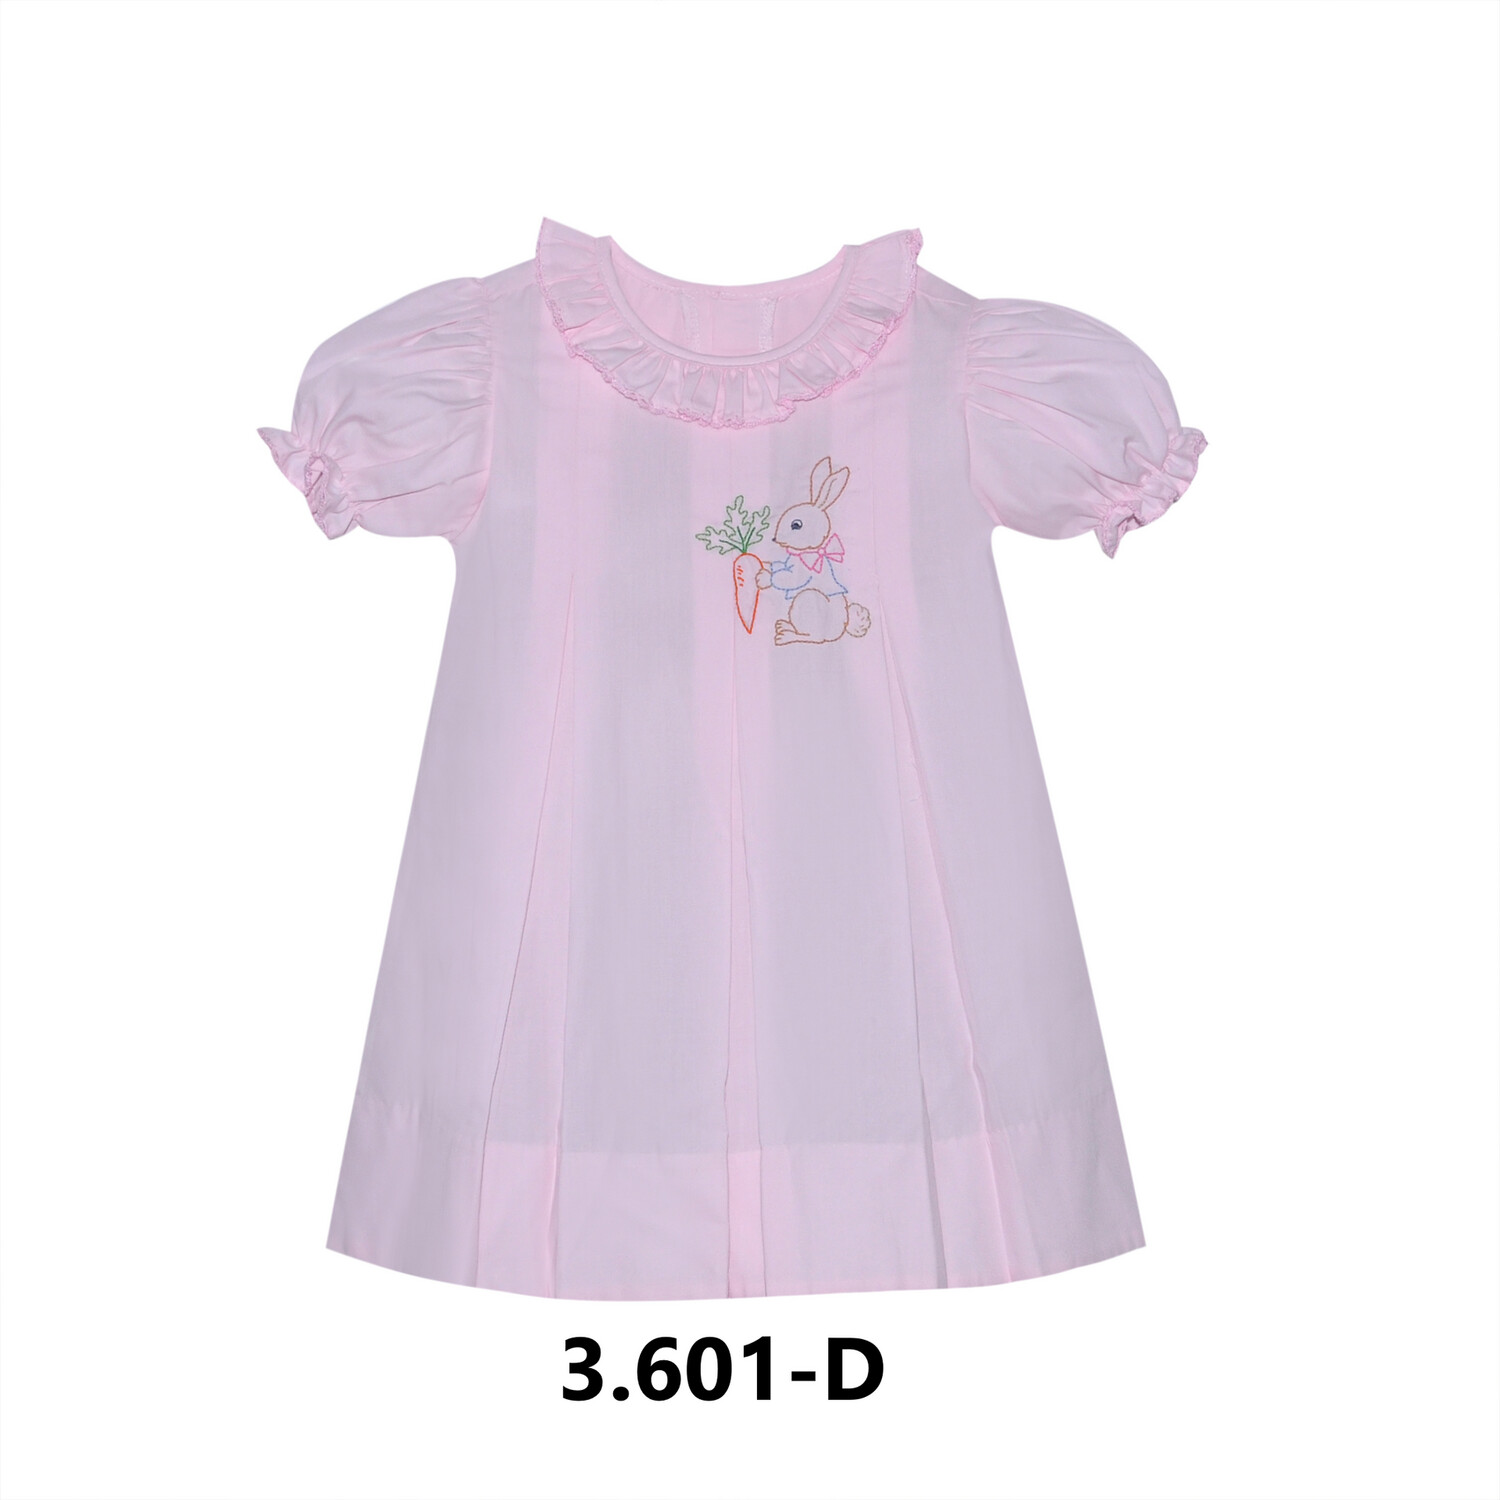 Reese Peter Cotton Tail Dress, Size: 12m